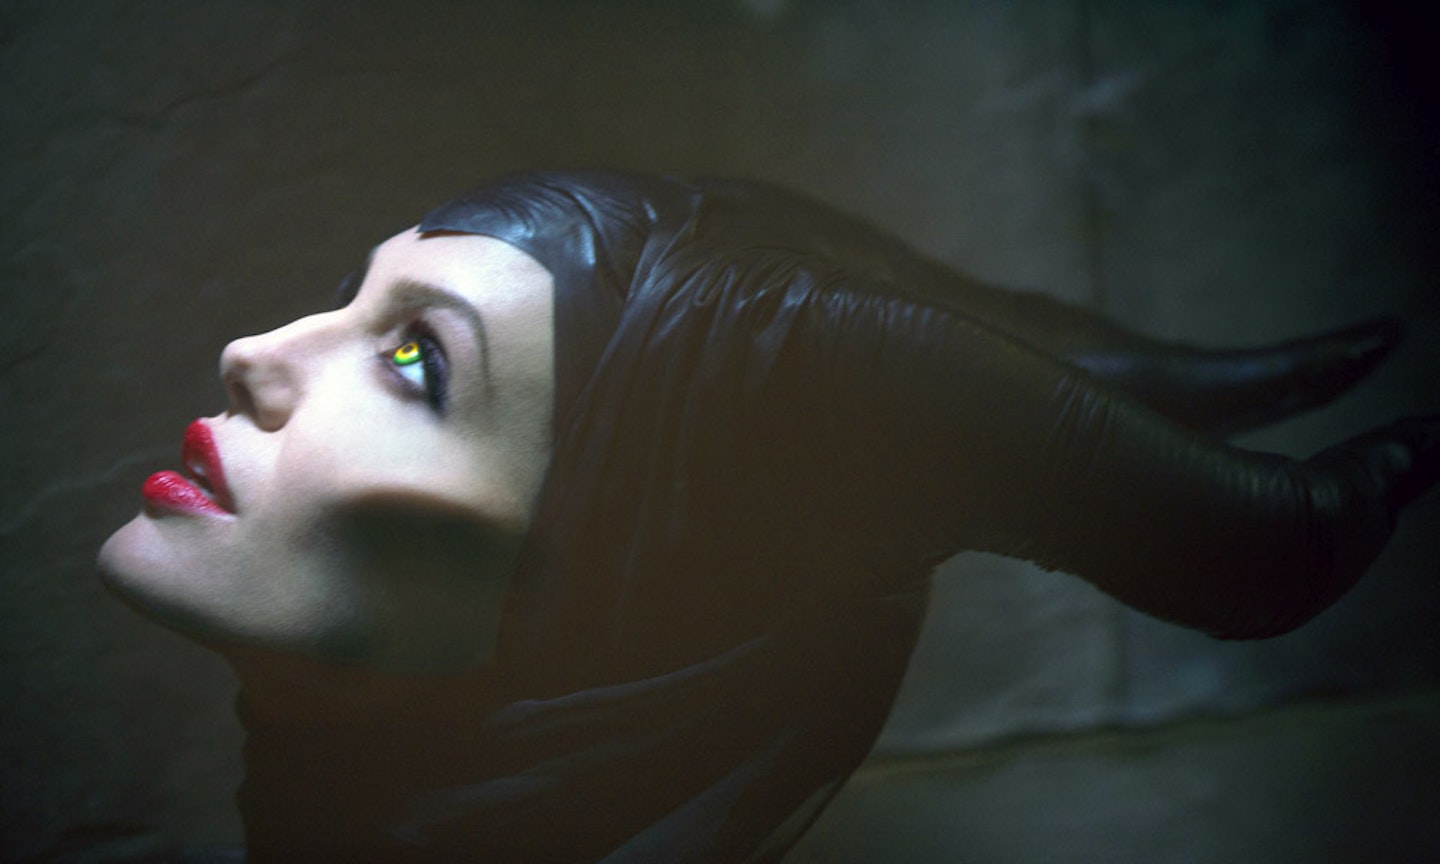 Director Robert Stromberg Finds More In Maleficent